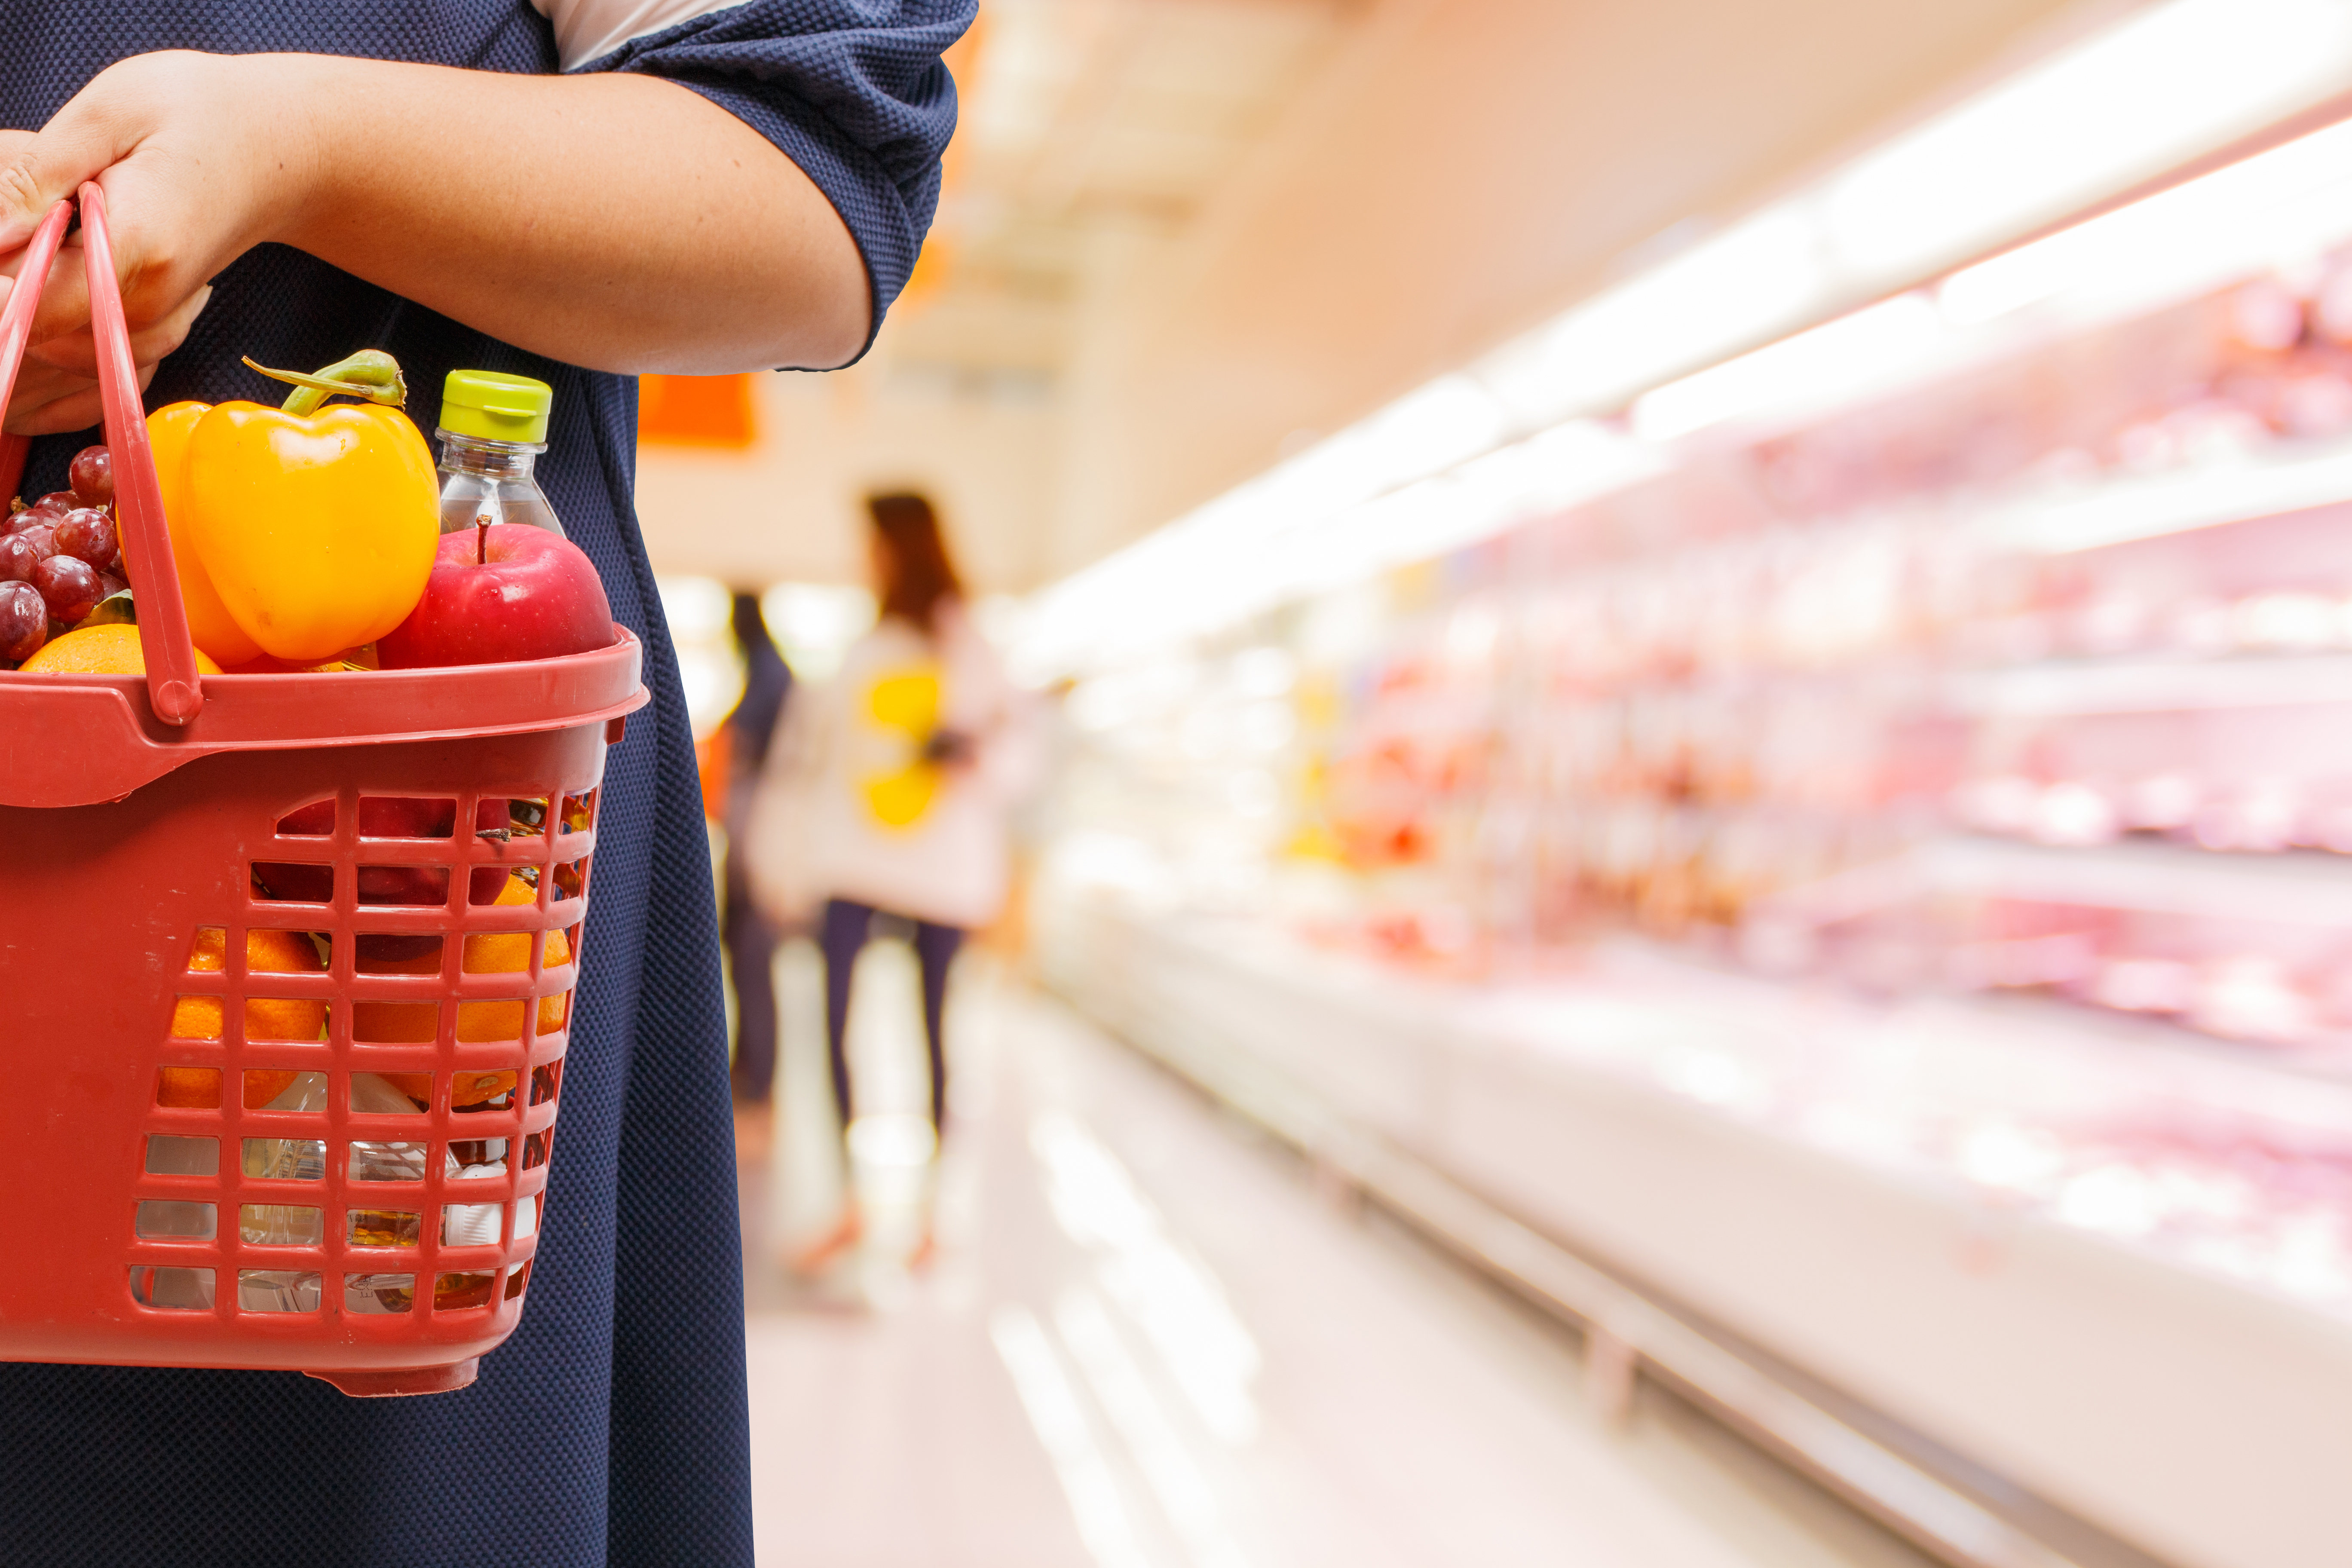 New Year's resolutions: cut your grocery bill (Image: Shutterstock)